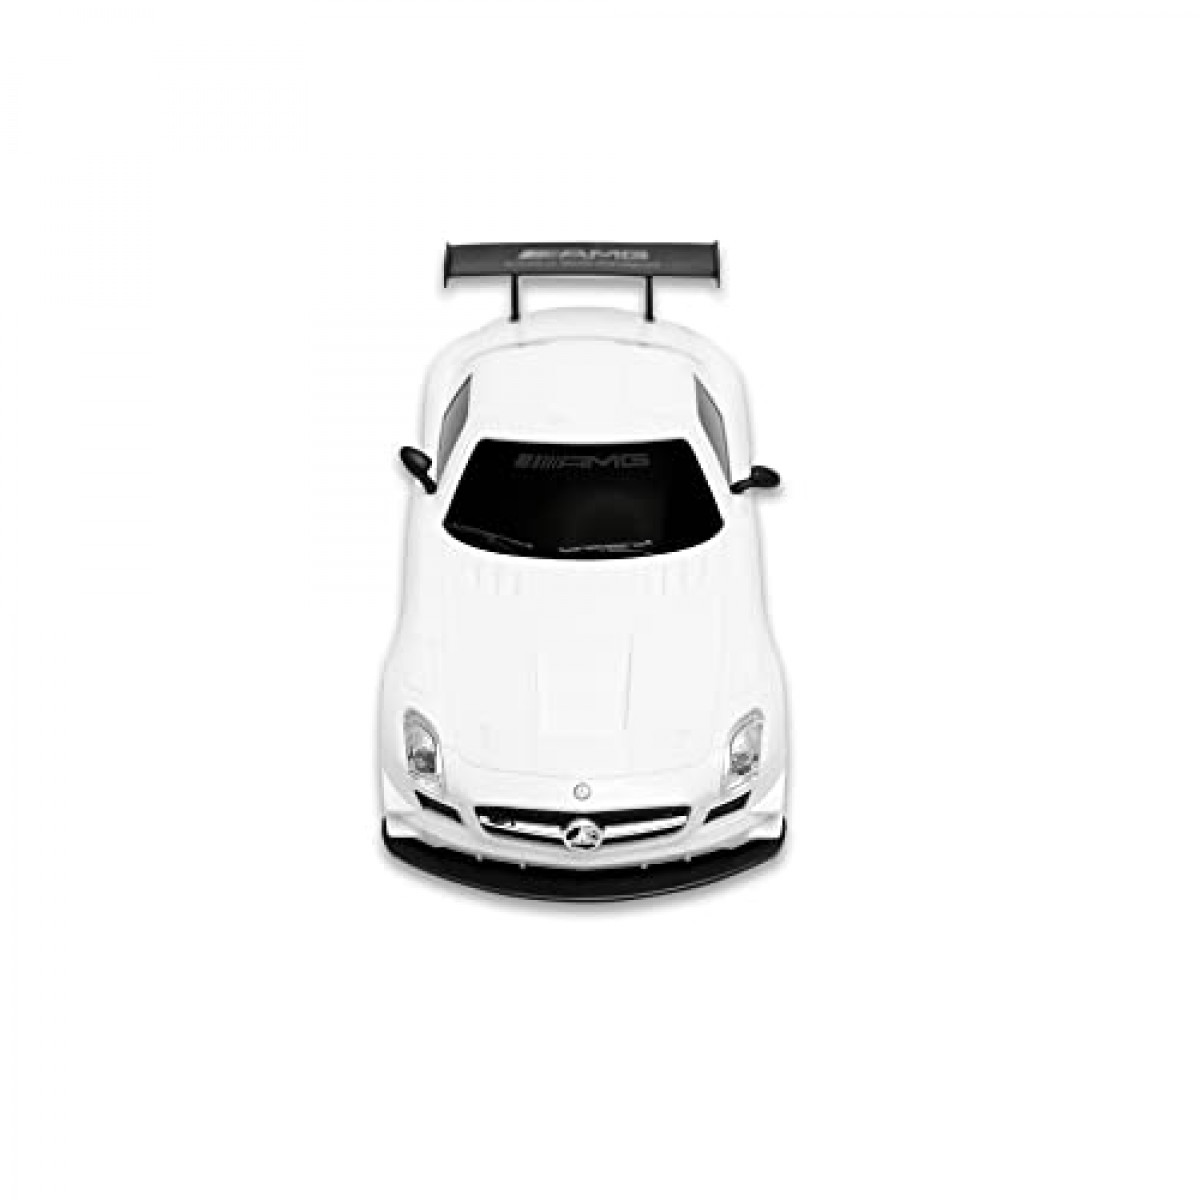 Road Burner Rechargable Remote Control Car for Kids Mercedes Benz SLS AMG GT3 Full Function, 1:24 Scale Pack of 1, White, Age 6Y+